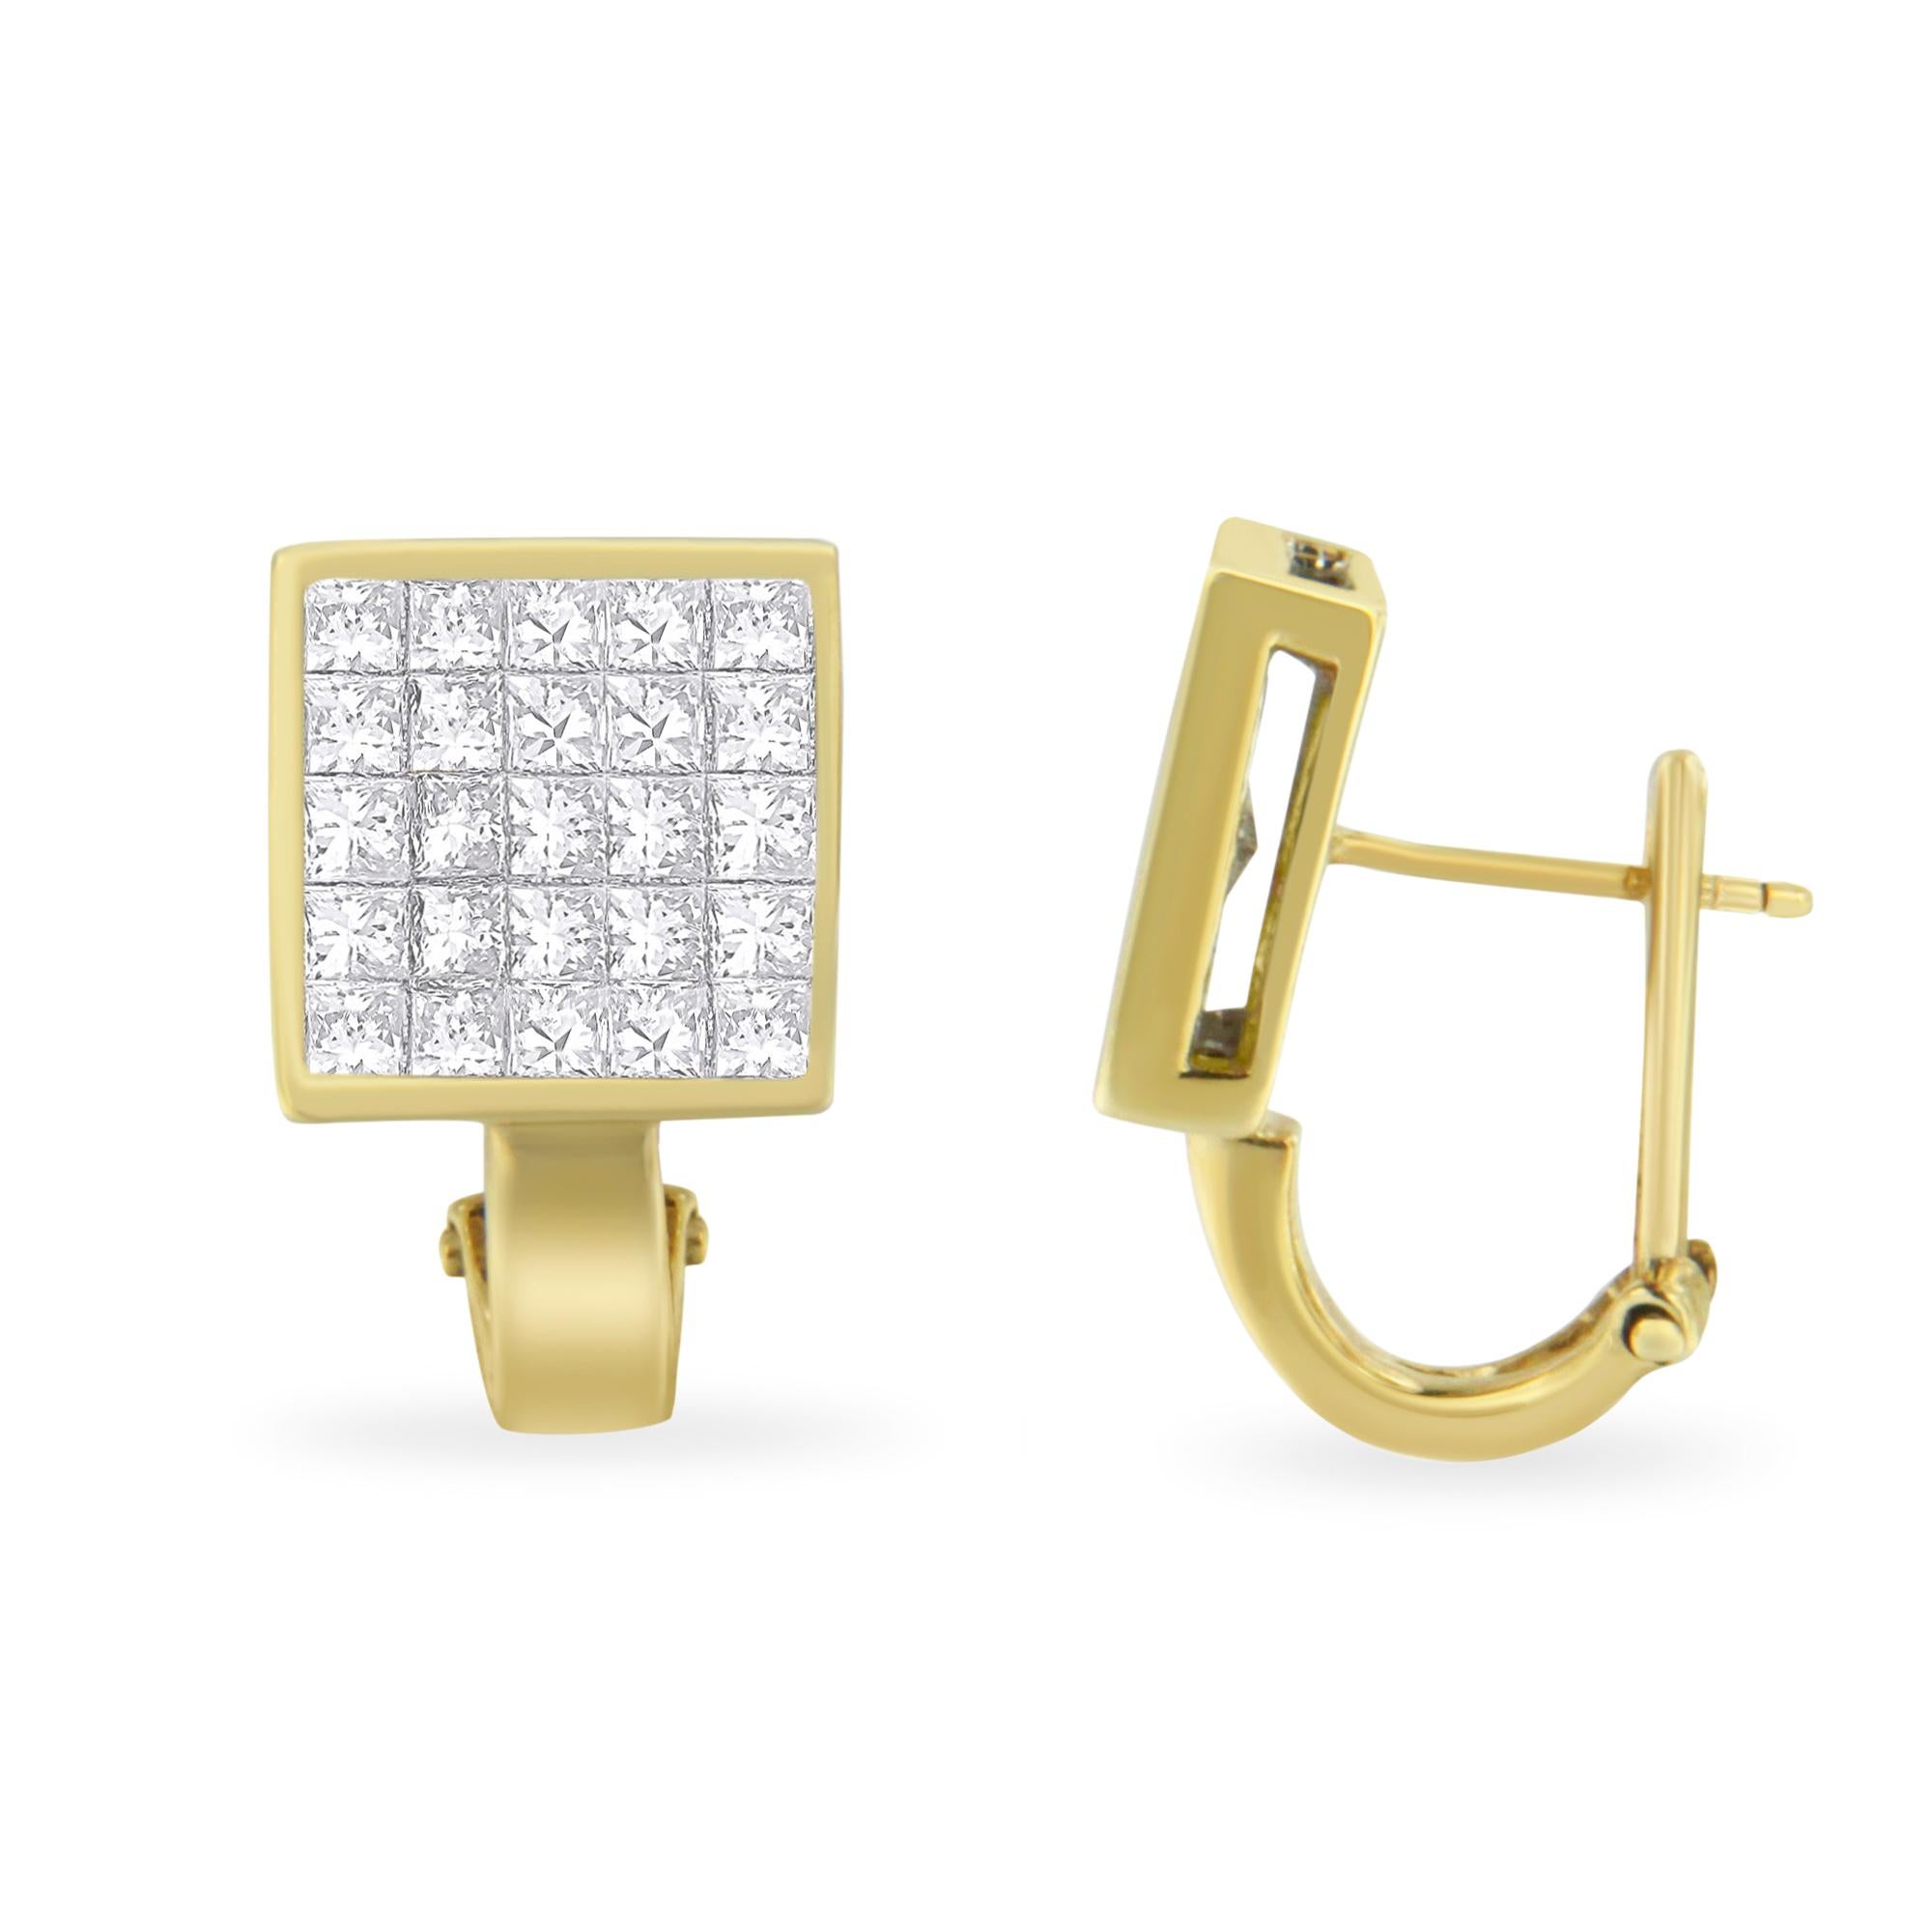 You will fall in love with these classic huggy stud earrings. A must have for any serious jewelry collection, these 14K yellow gold earrings boast an impressive 3.2 carat total weight of diamonds with a whopping 50 individual stones. The earrings